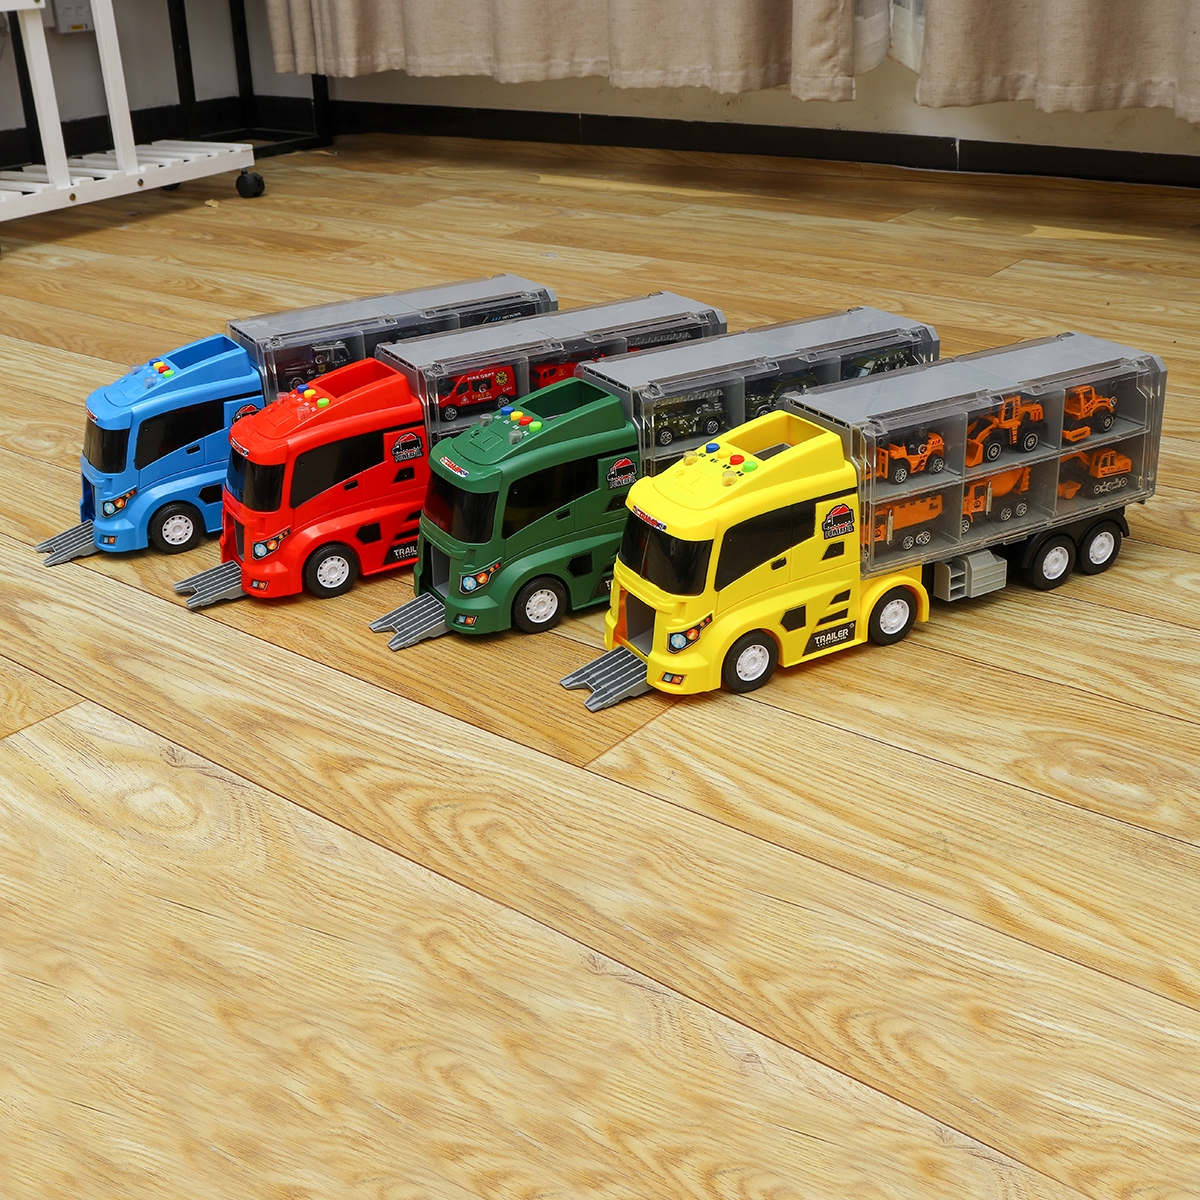 6Pcs/7Pcs Play Vehicles Construction Vehicle Truck Cars Toys Set Friction Powered Push Engineering Vehicles Assorted Construction for Boys and Girls